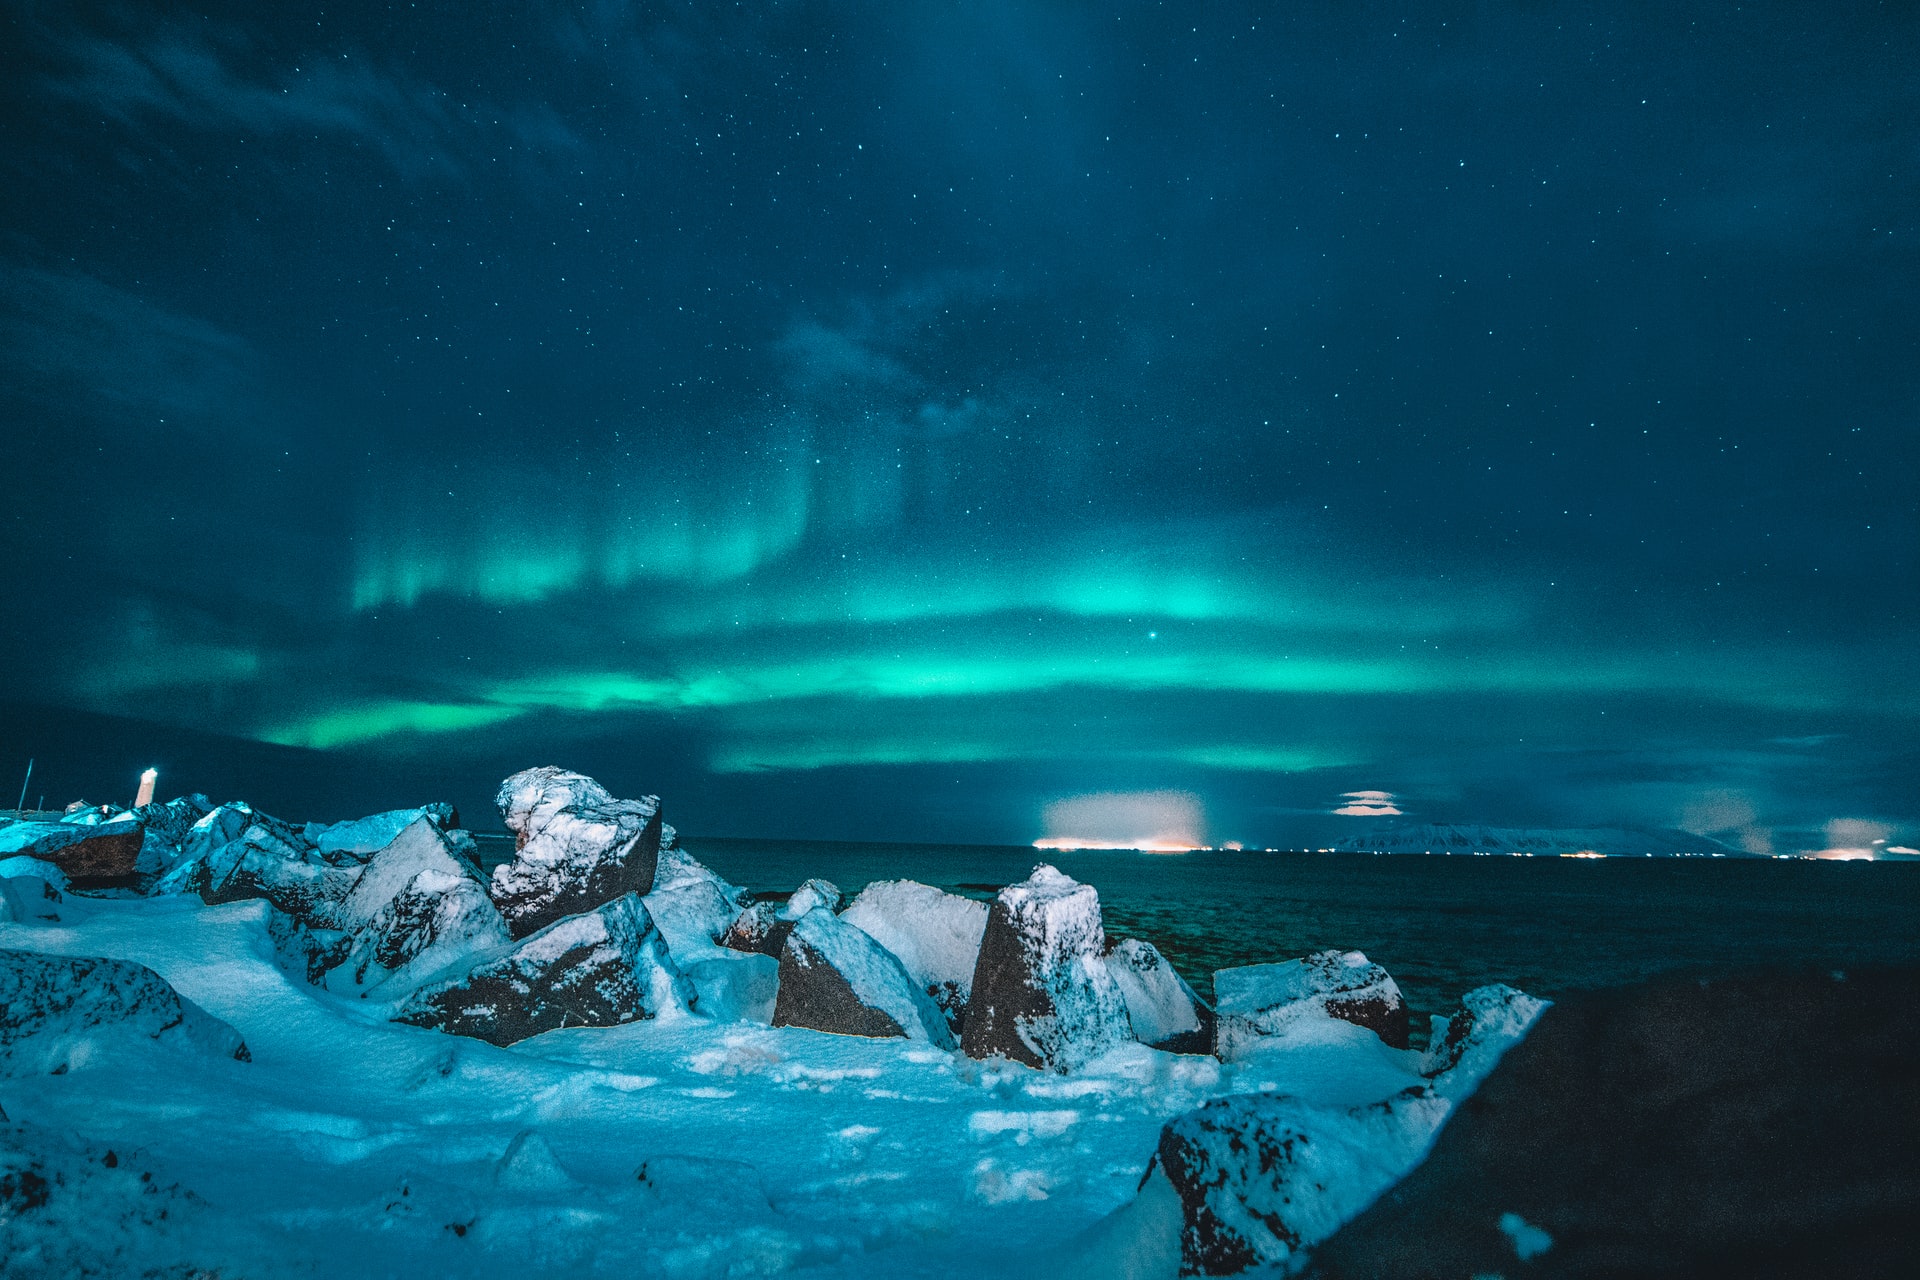 AWS Aurora Serverless is a cool service. And my feelings towards it are currently ice cold. Photo by Nicolas J Leclercq (@nicolasjleclercq) on Unsplash.